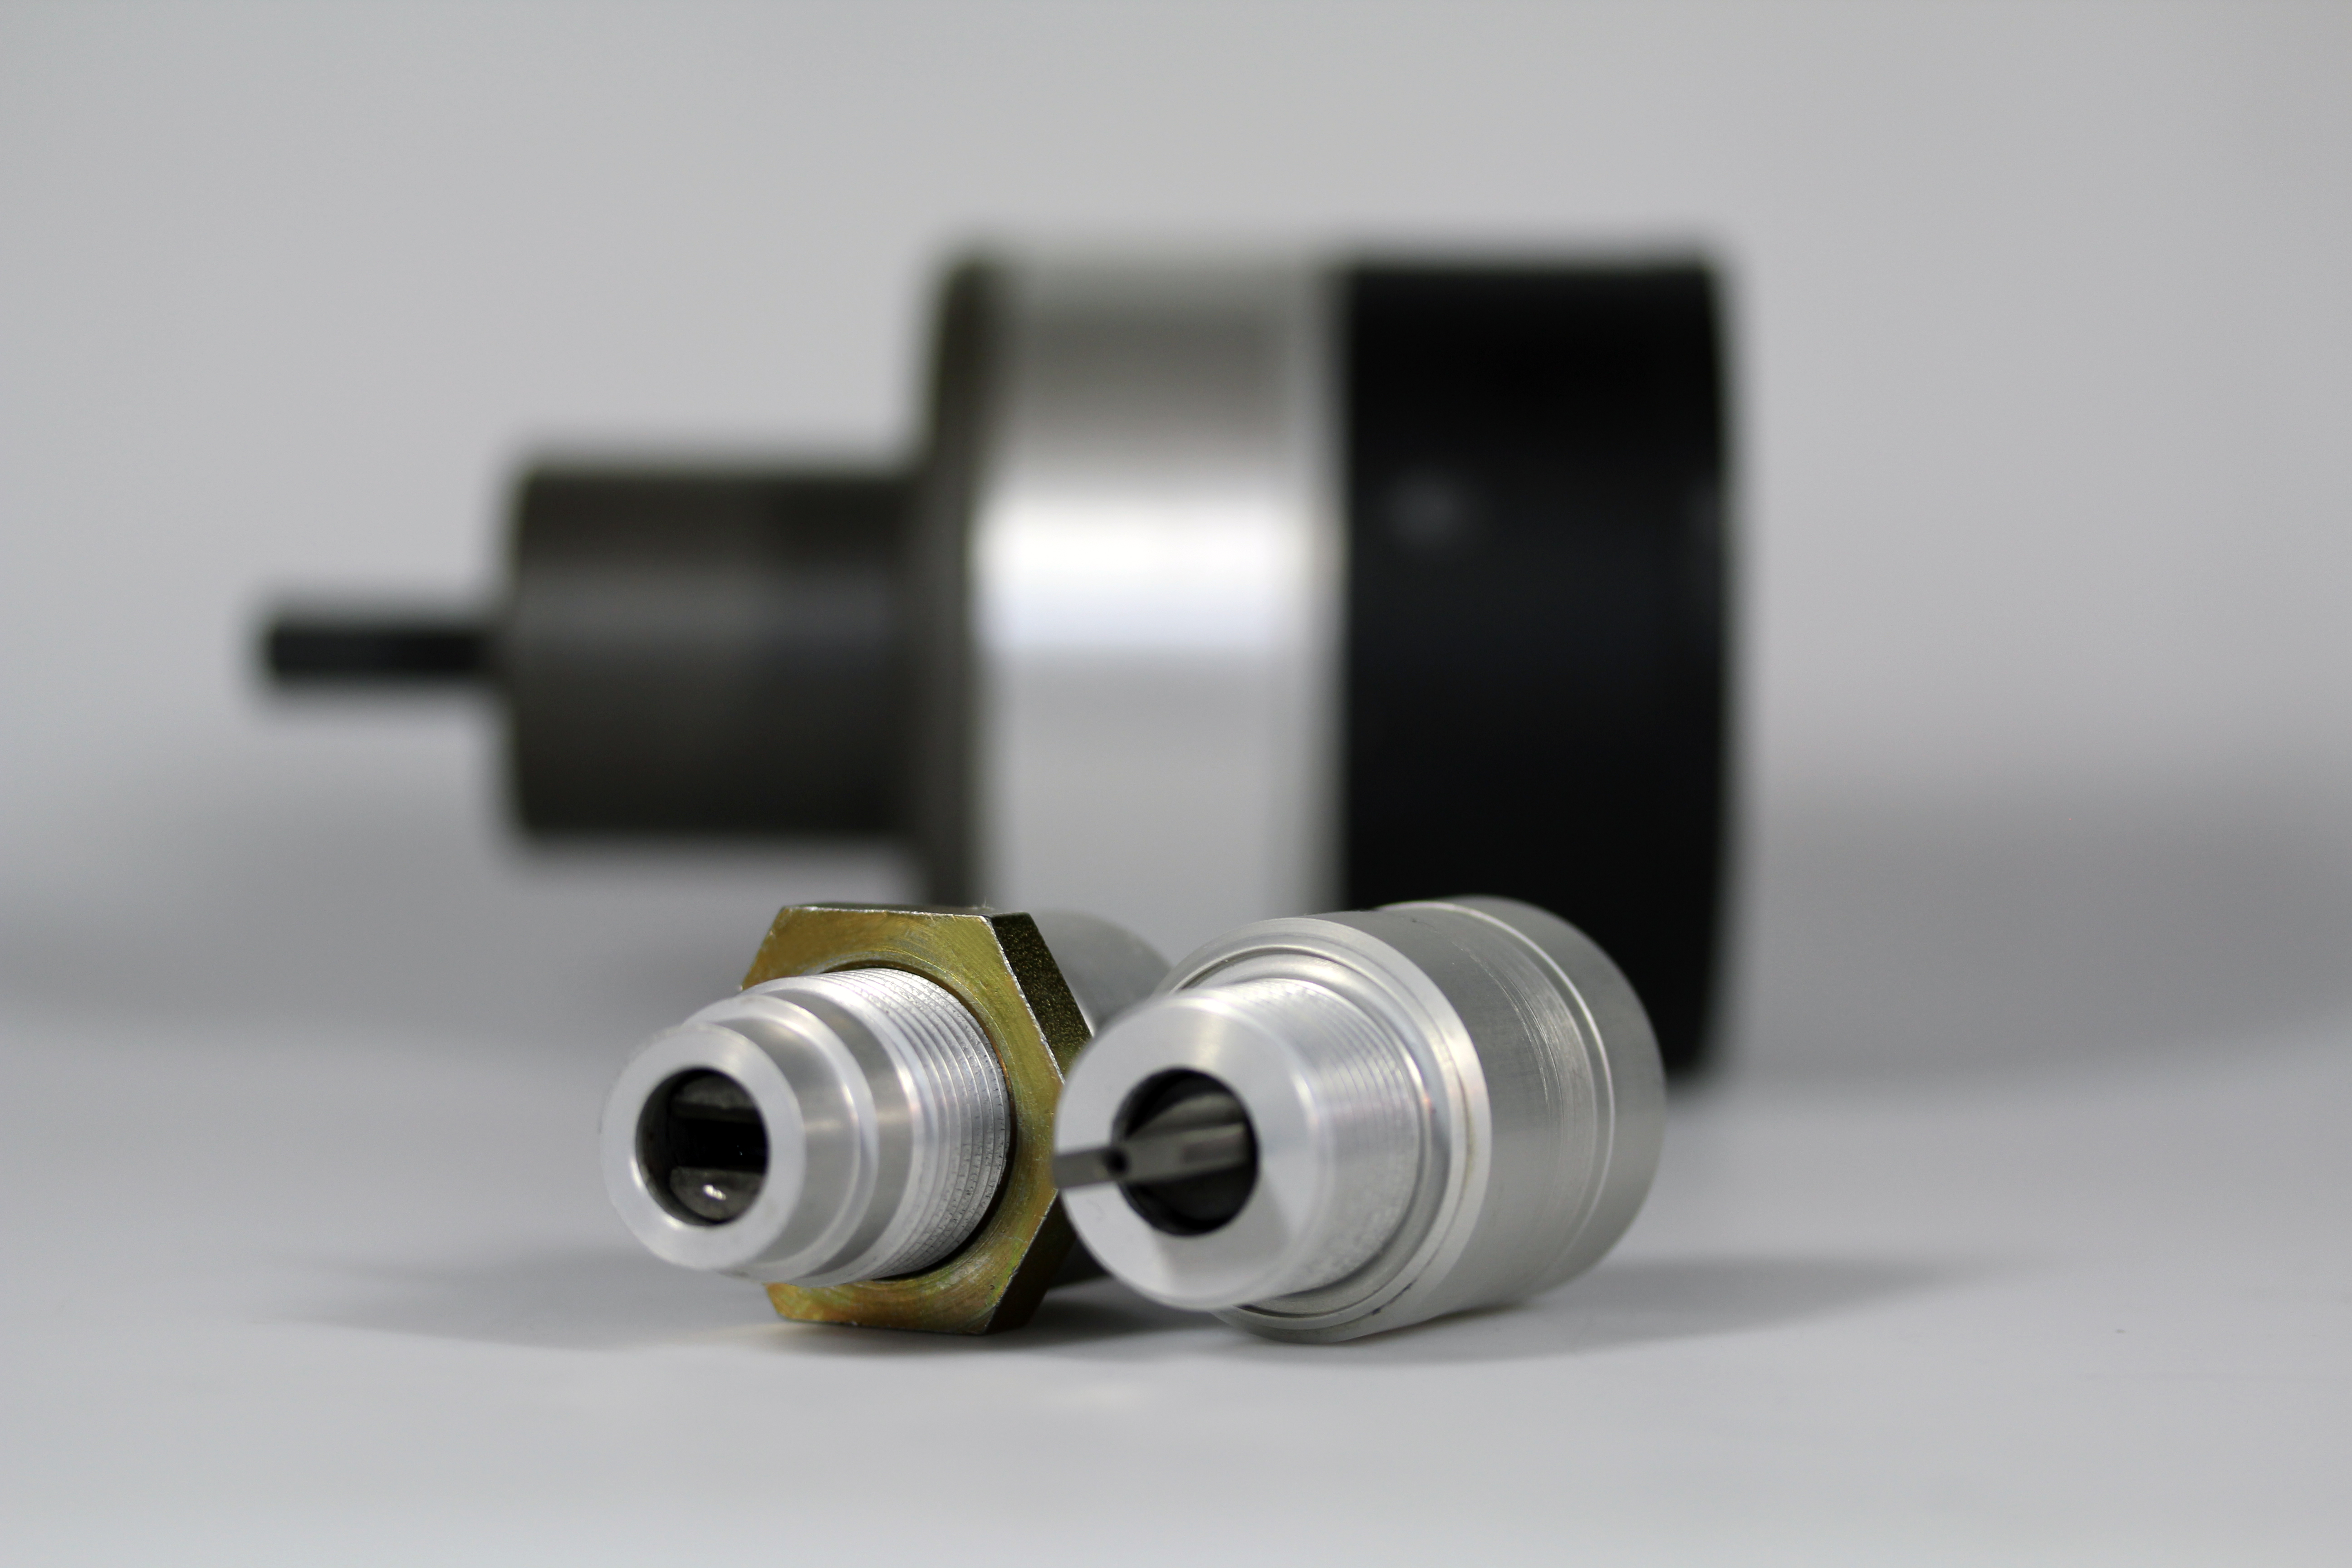 The image shows three mechanical connected spee encoder laying on a grey background